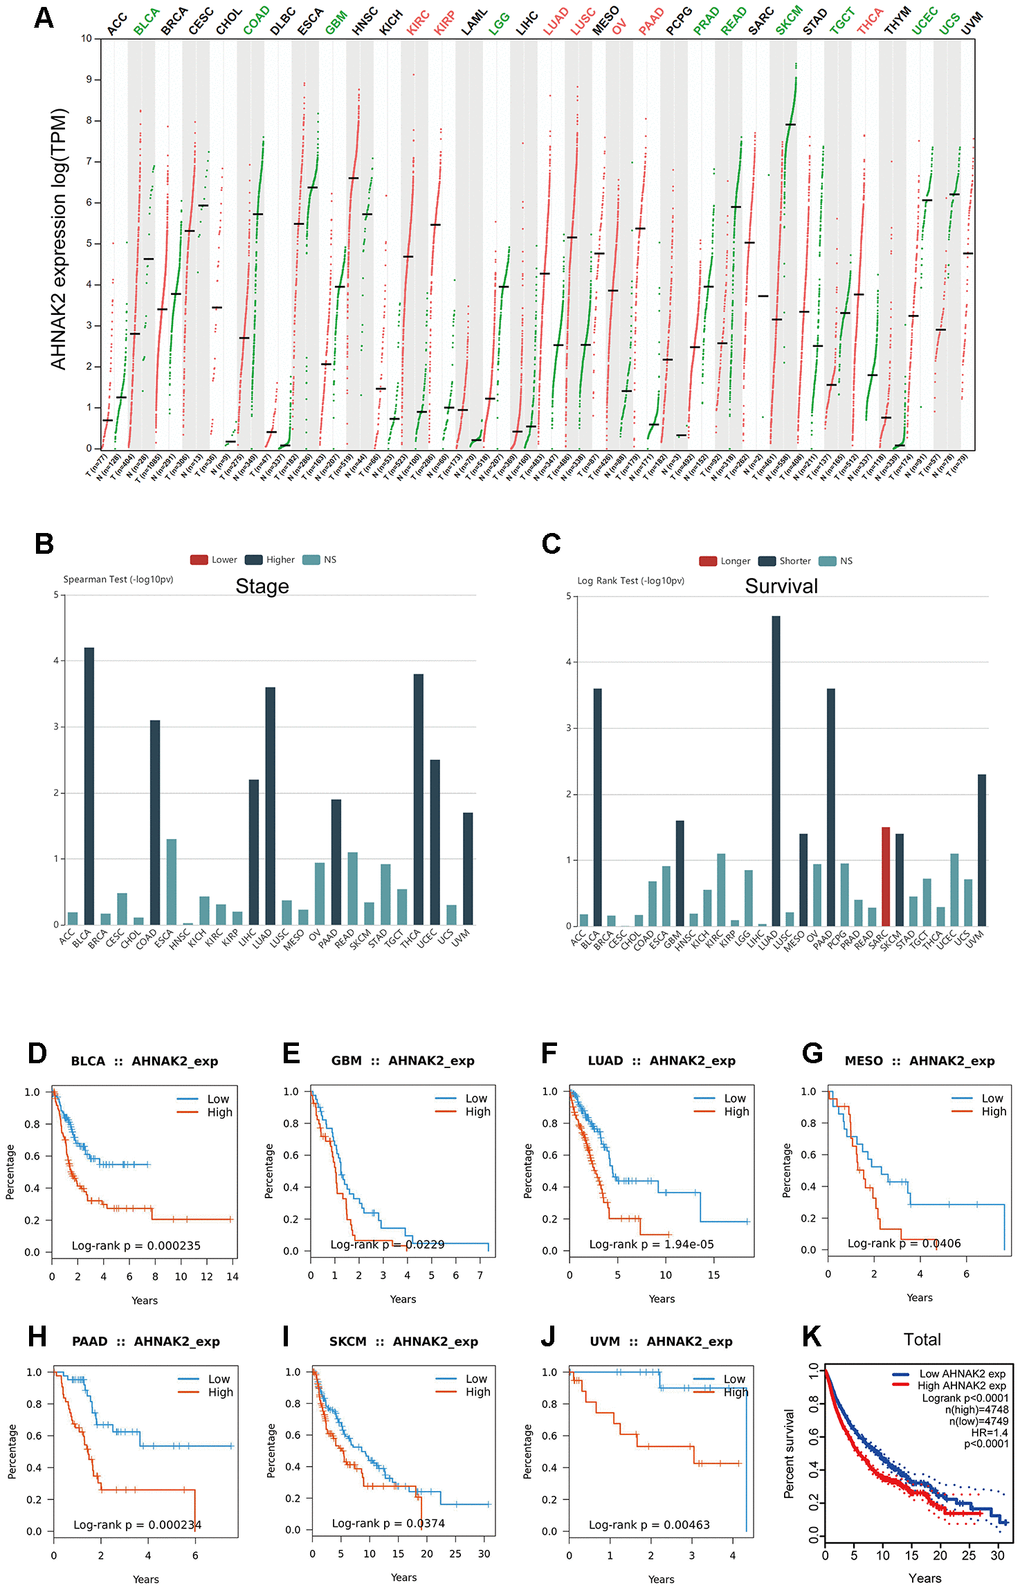 Generalization value of AHNAK2 in pan-cancer. (A) Comparison of AHNAK2 mRNA expression between pan-cancer cancerous and paracancerous tissues based on GEPIA. (B) Associations between AHNAK2 expression and stage across human cancers based on TISIDB. (C) Associations between AHNAK2 expression and overall survival across human cancers based on TISIDB. K-M survival analysis of (D) BLCA, (E) GBM, (F) LUAD, (G) MESO, (H) PAAD, (I) SKCM, (J) UVM, and (K) pan-cancer in the low AHNAK2 and high AHNAK2 groups based on TISIDB and GEPIA. NS: no significance.